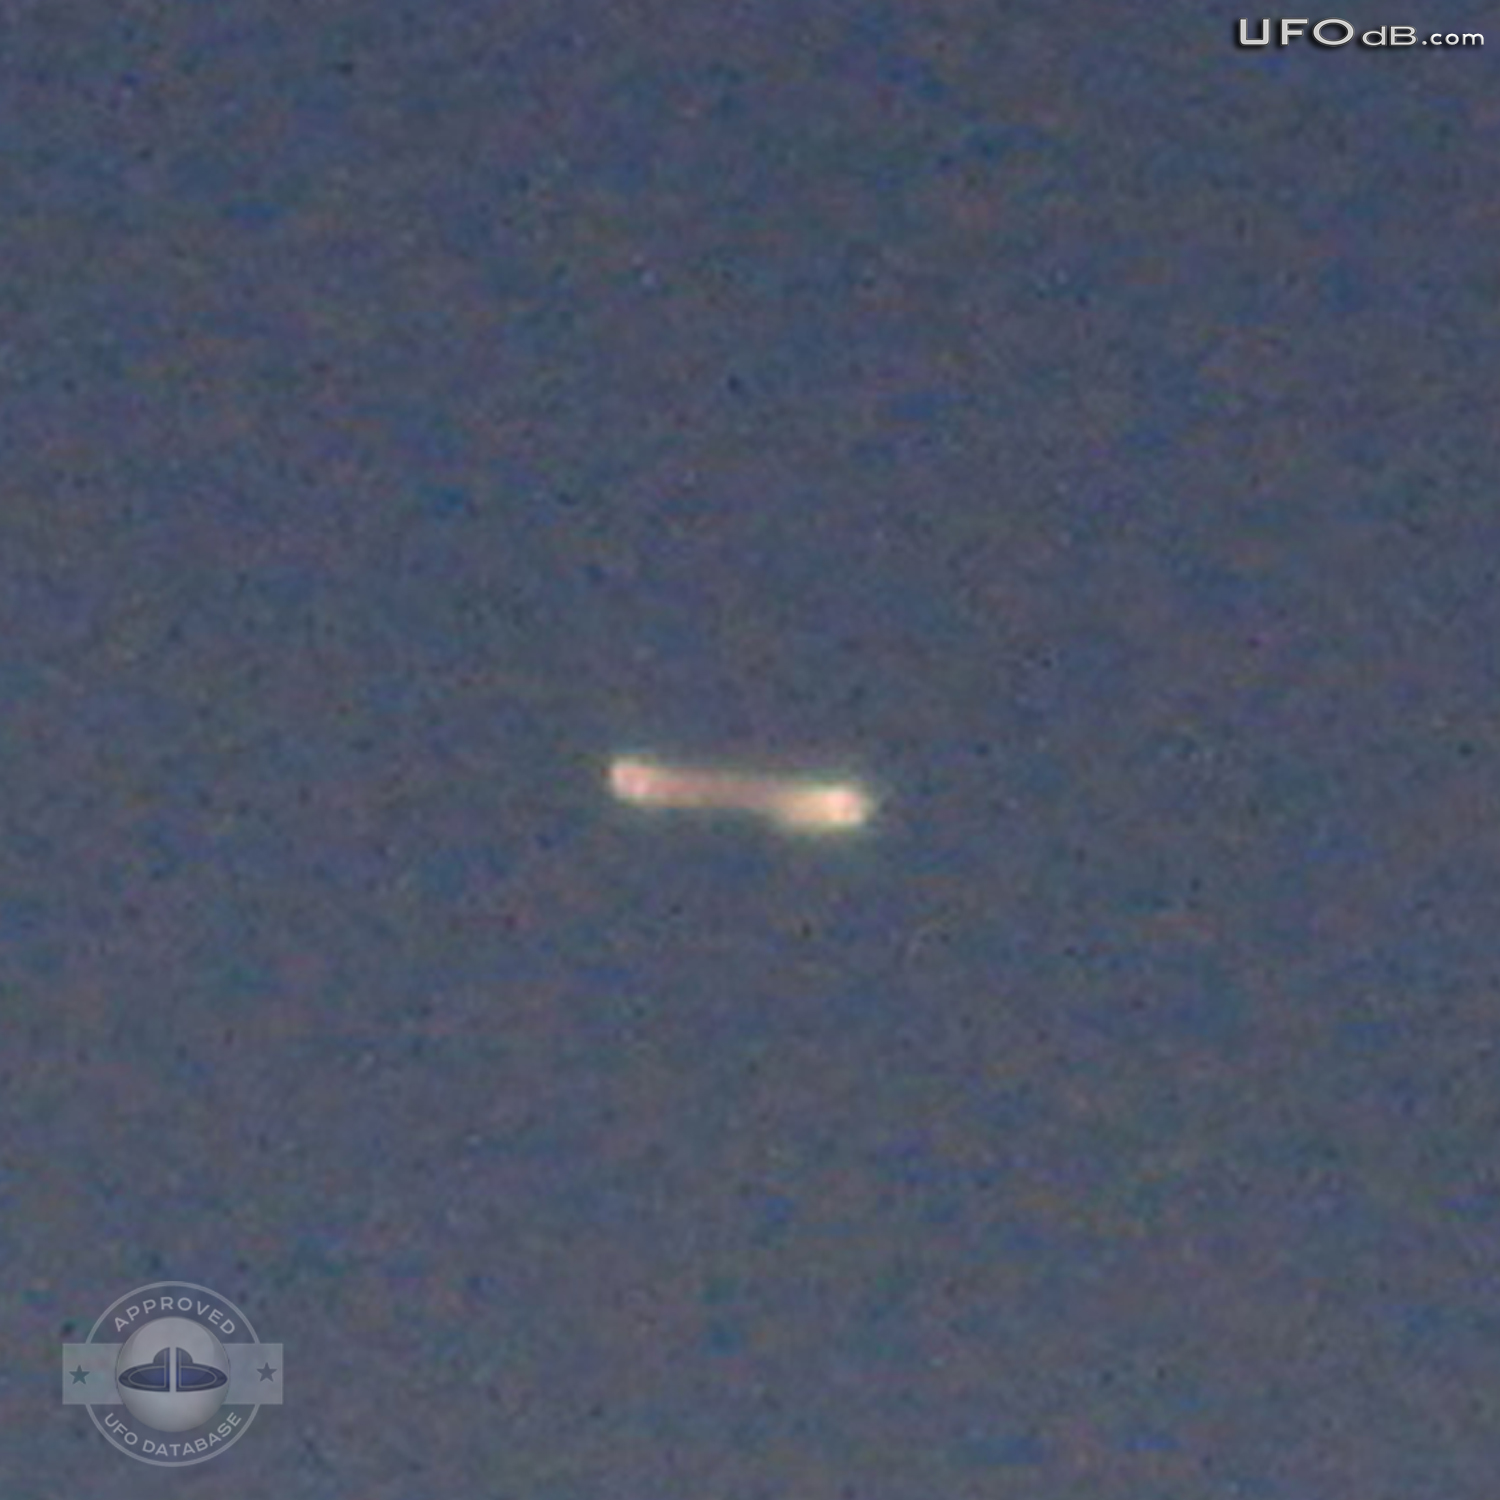 Changing Luminance UFO caught on picture | Katy, Texas | April 6 2011 UFO Picture #306-3